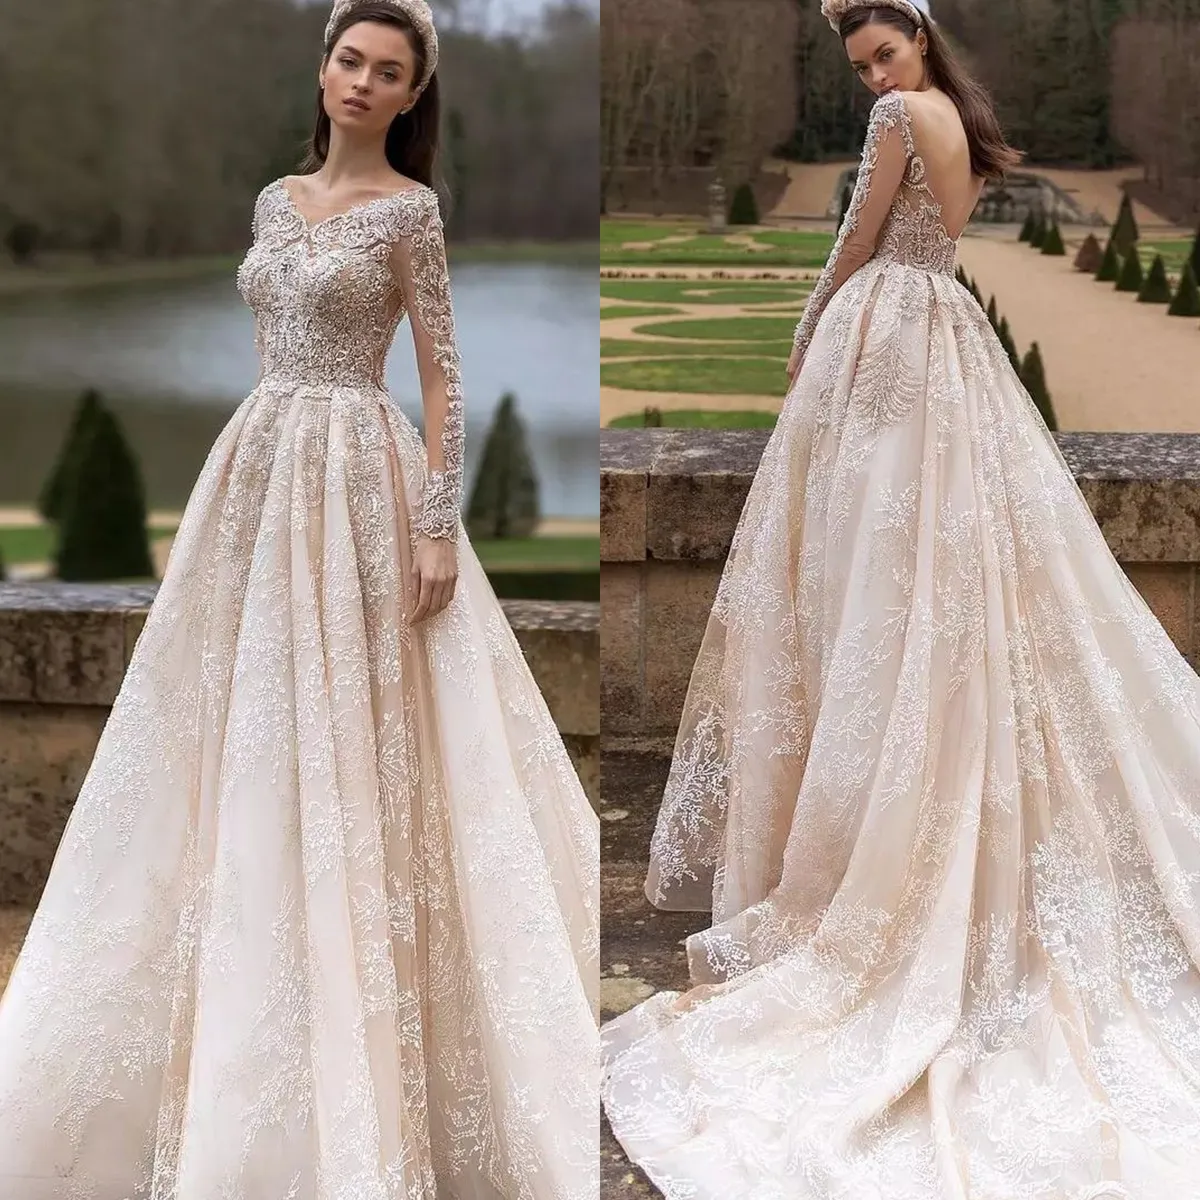 Elegant A-Line Wedding Dresses For Women Backless O-Neck Beaded Lace Appliques Princess Wedding Gown Long Sleeve Bridal Gown